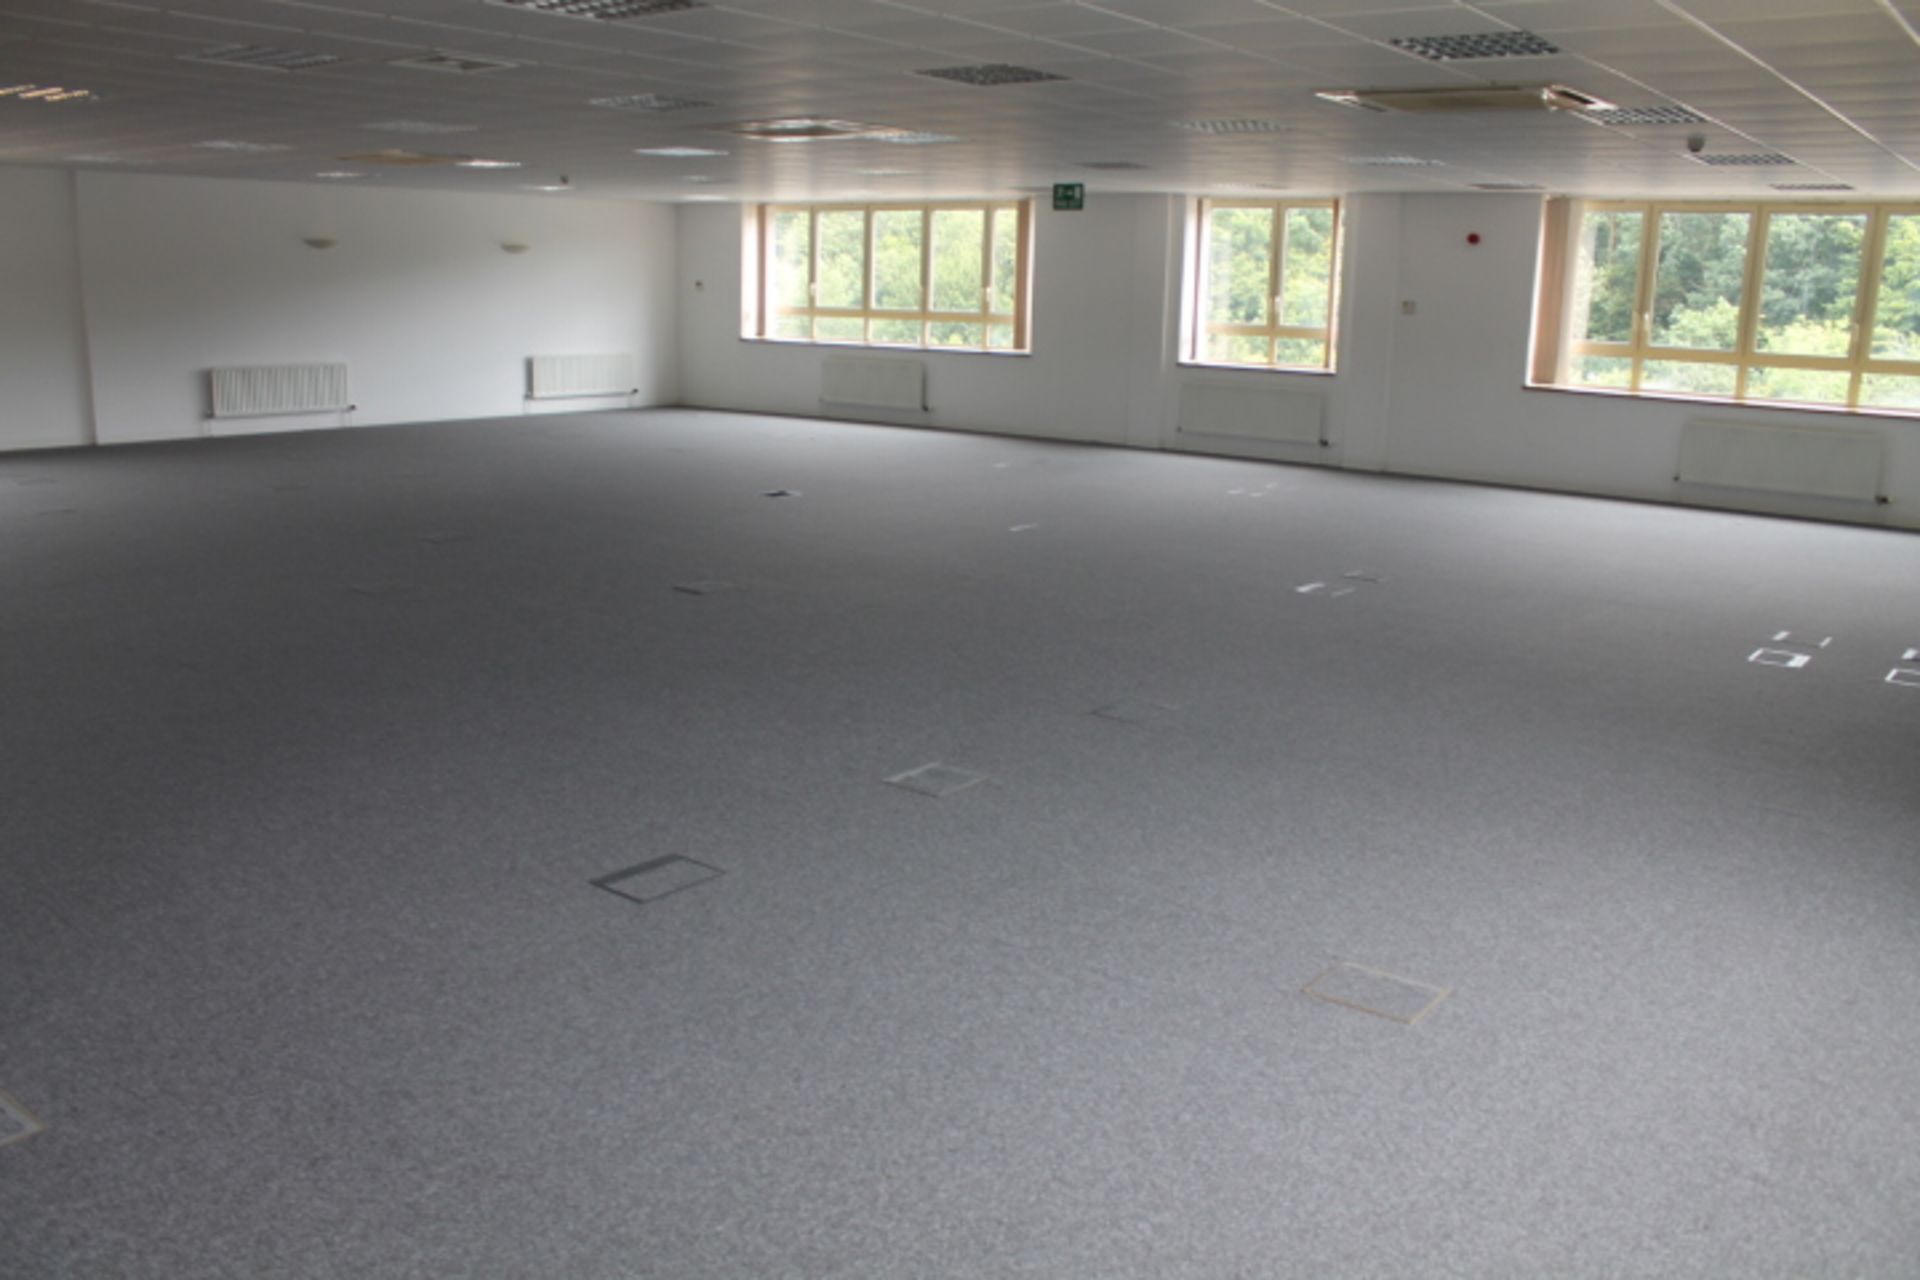 Approx 200 Grey Contract Cord carpet Tiles Measuring 50cm x 50cm, - Image 3 of 3